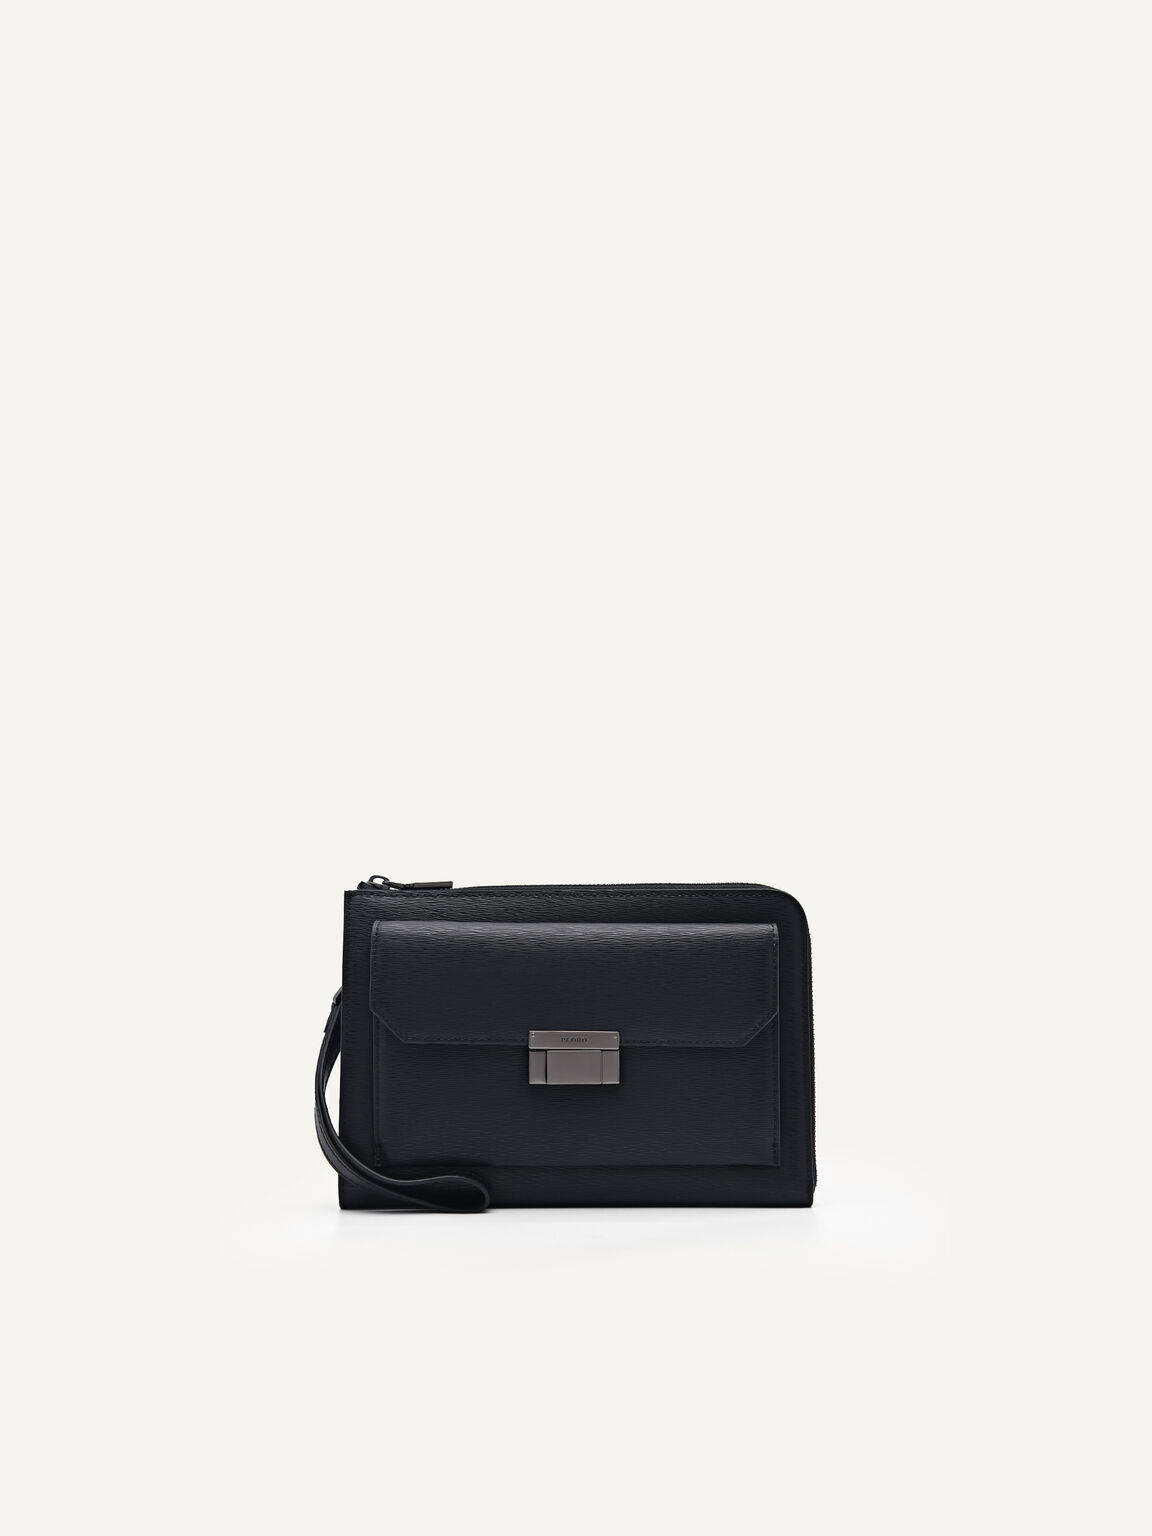 Henry Small Leather Clutch Bag, Black